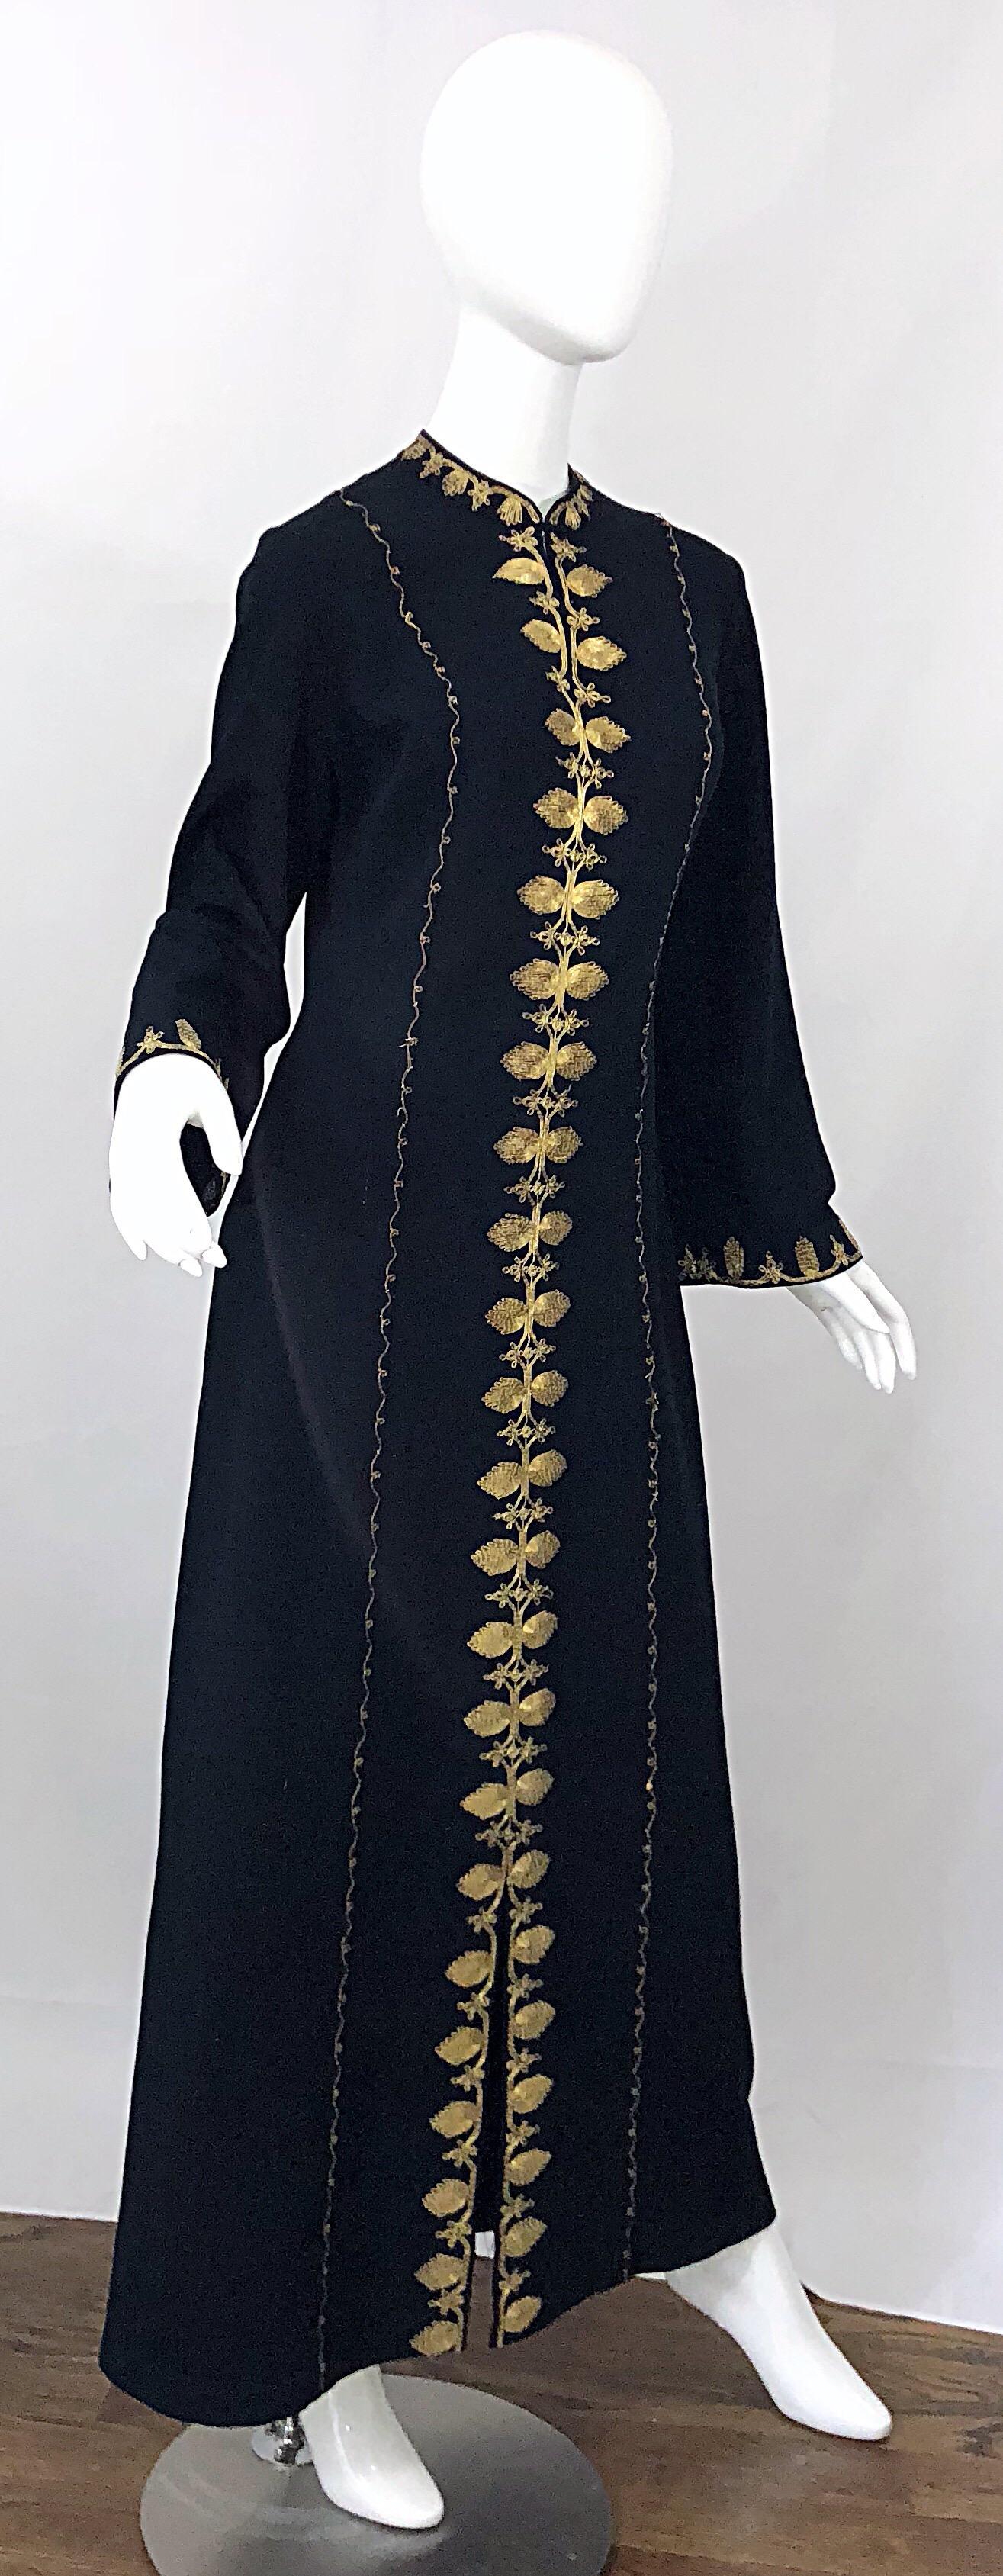 1970s Moroccan Black + Gold Metal Embroidered Vintage 70s Caftan Maxi Dress For Sale 4